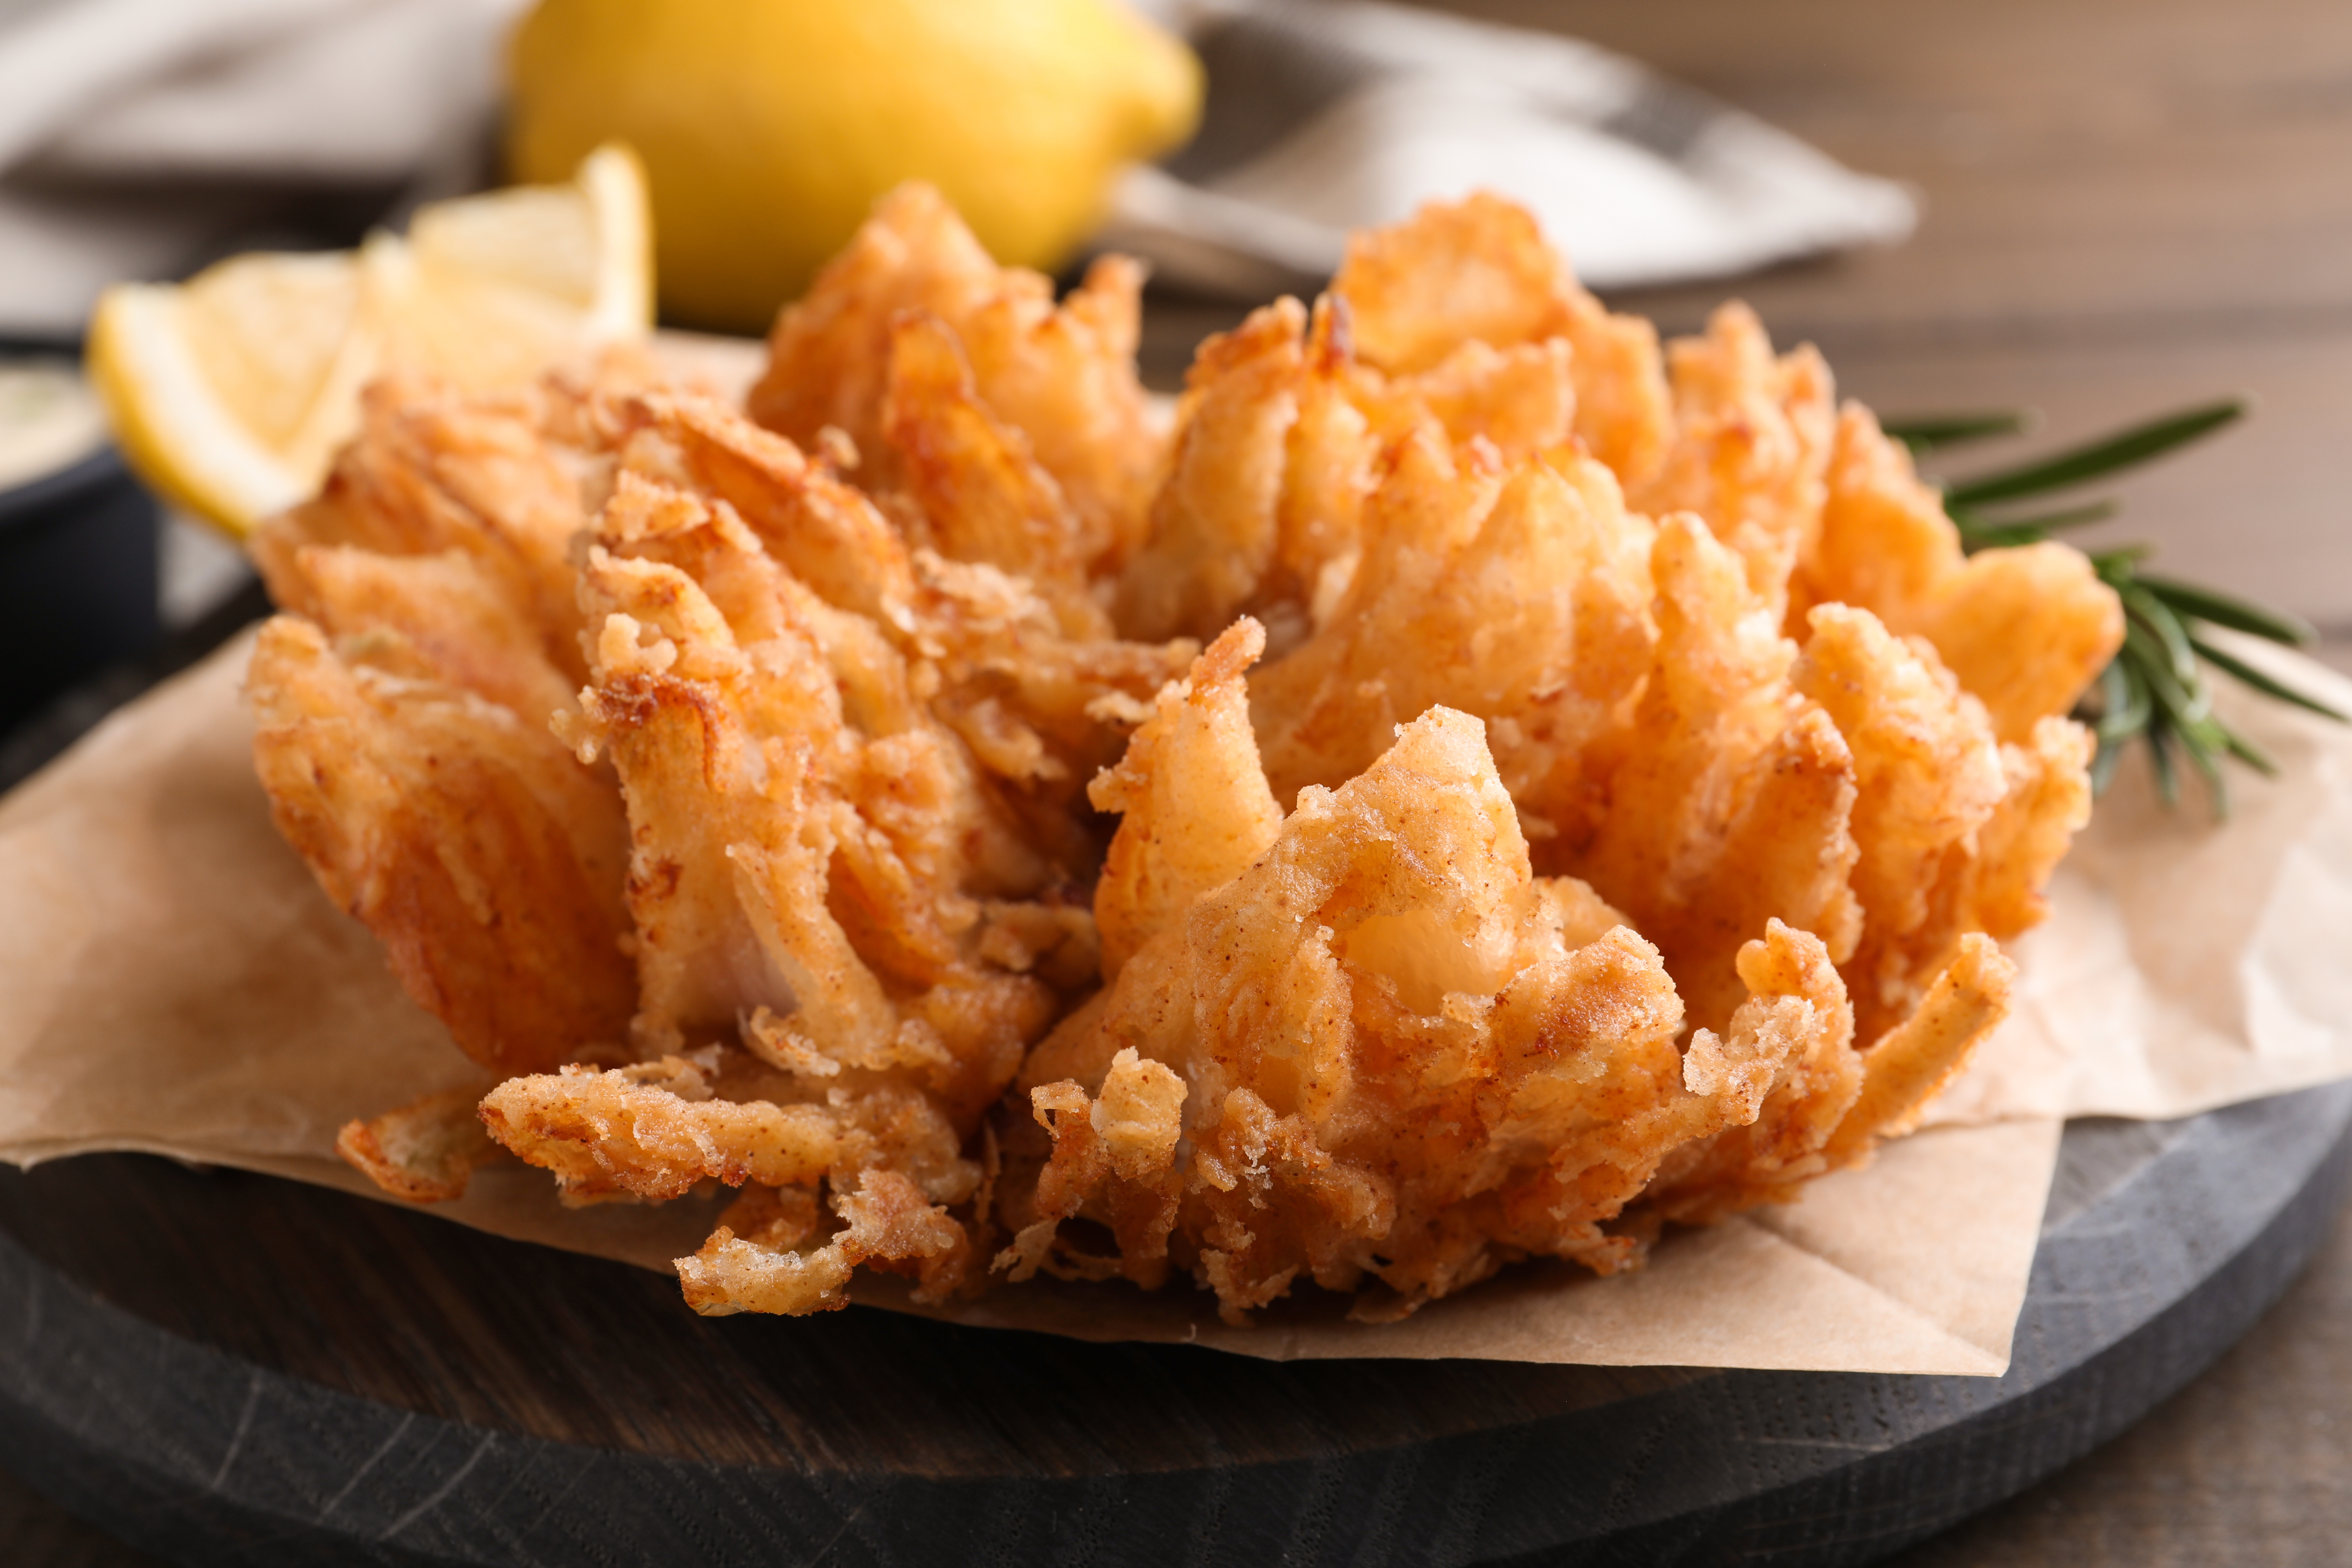 Fried onion blossom rests on paper on a slate.